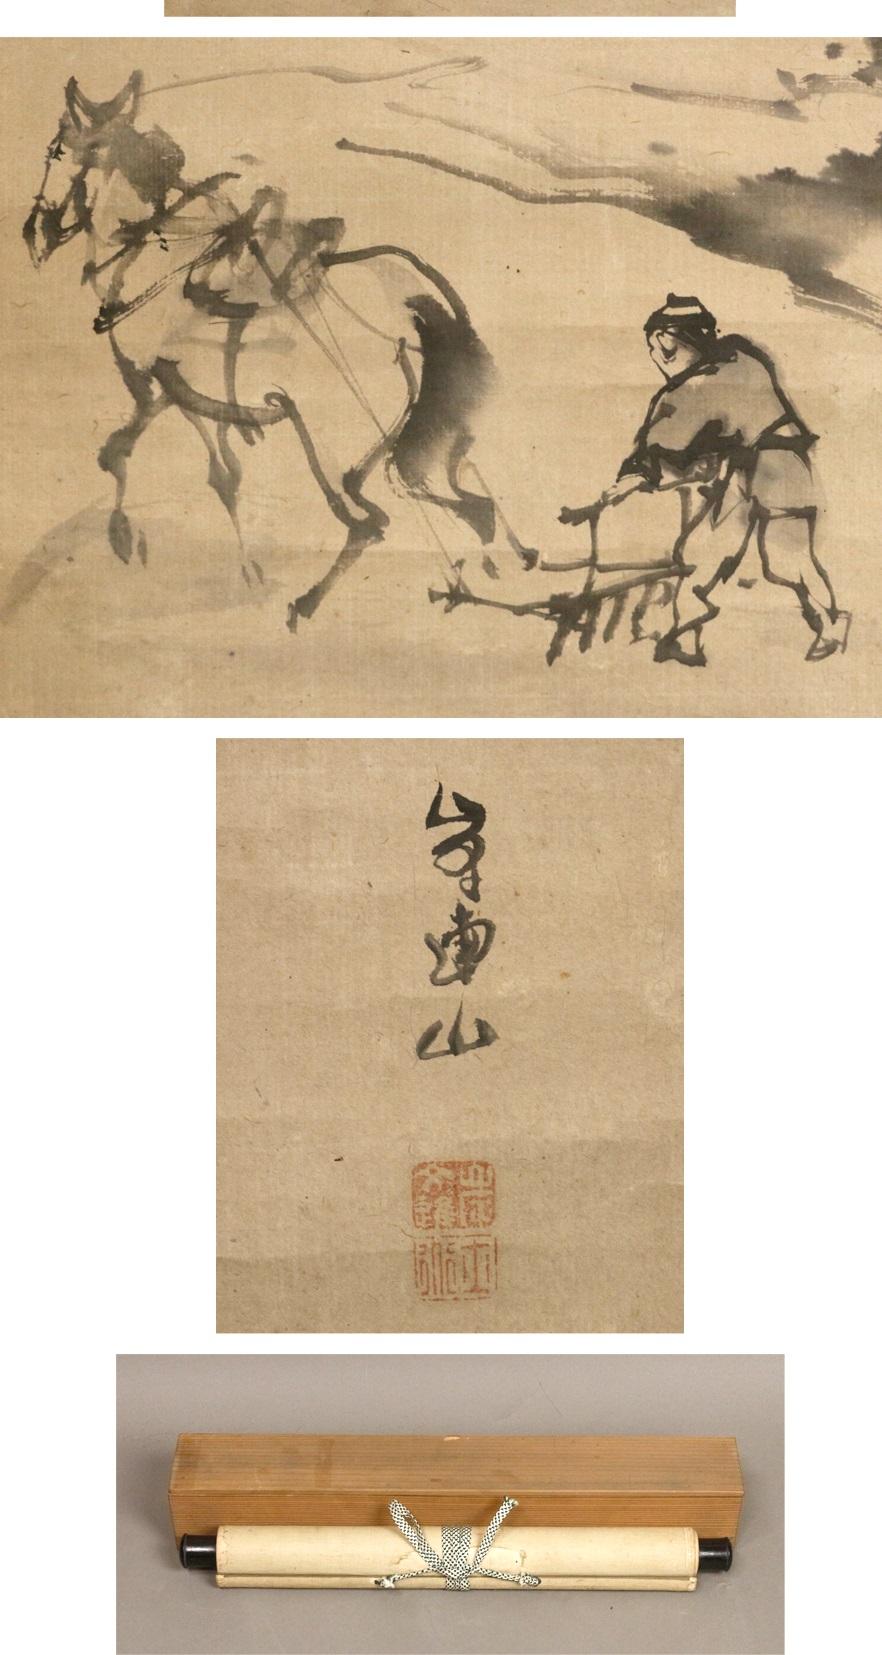 The simple country side life is the ideal of the Oriental scholar.
As you can see, the Kishi Renzan agricultural rice field working painting / box is included.
Agricultural rice fields are worked using horses, and the houses and mountains that can